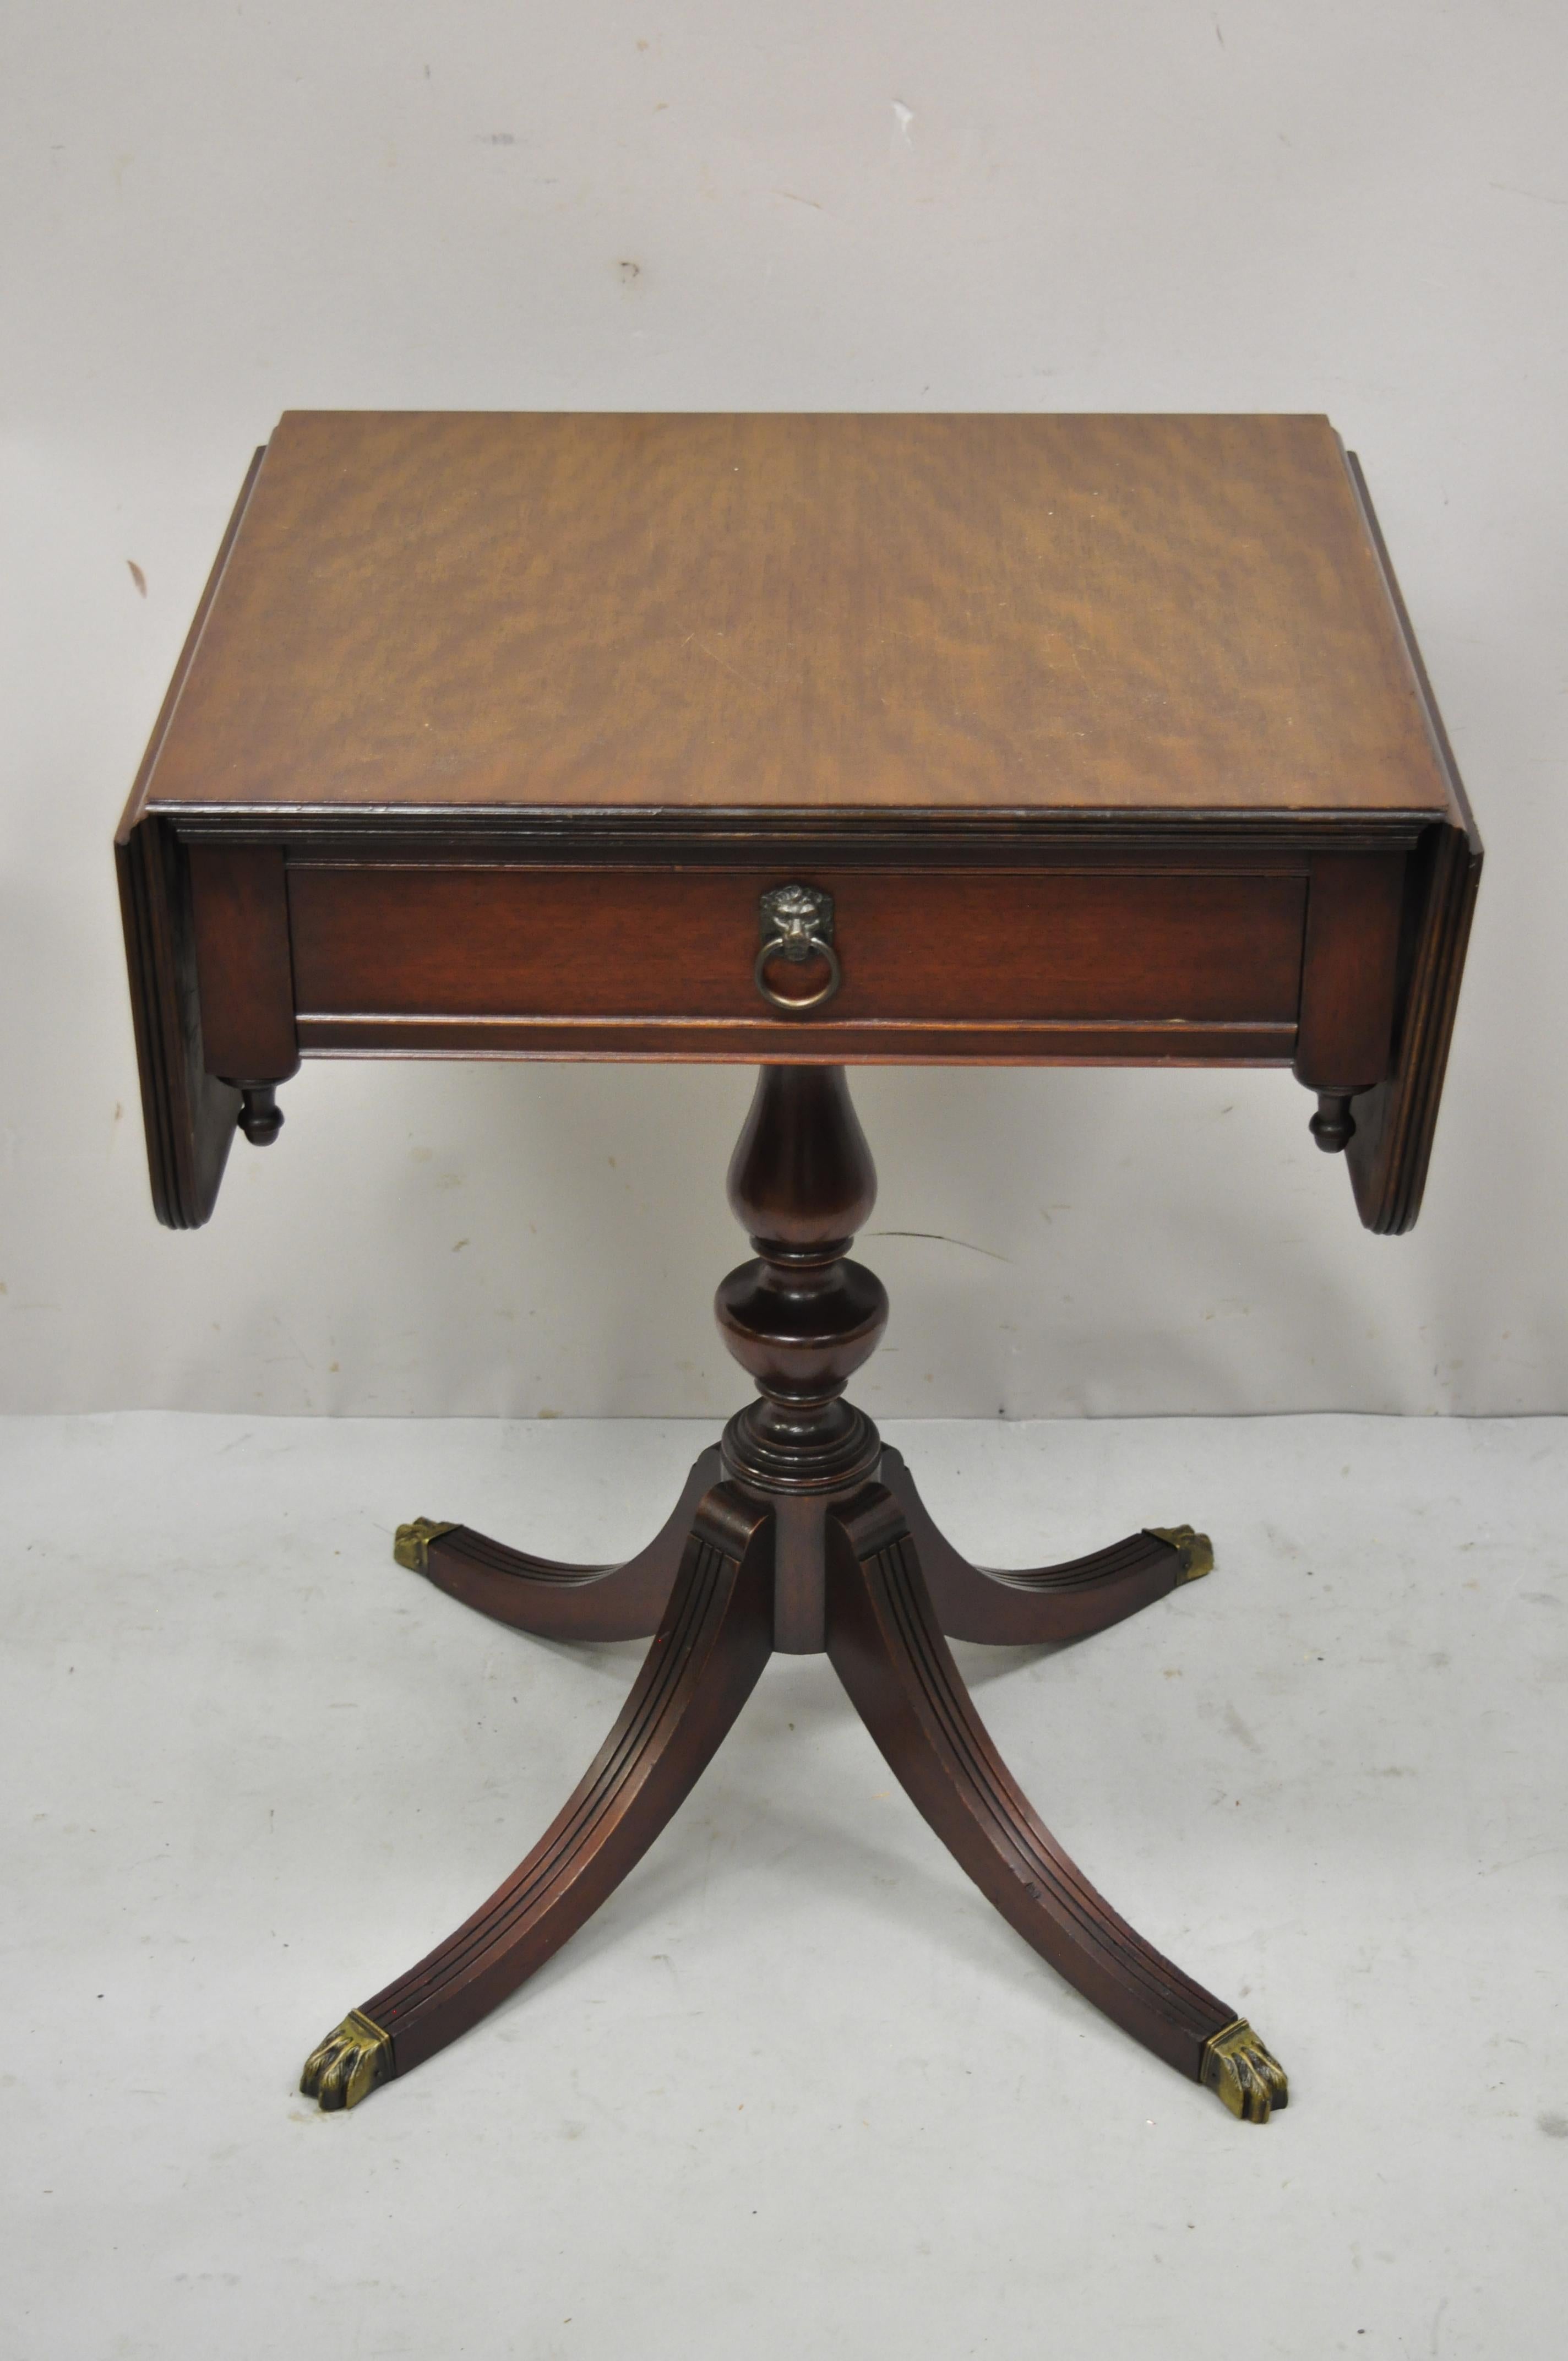 Antique Duncan Phyfe pedestal base mahogany dropleaf Pembroke lamp side table. Item features brass claw feet, pedestal base, drop sides, brass lion head drawer pulls, beautiful wood grain, 1 dovetailed drawer, very nice antique item, great style and